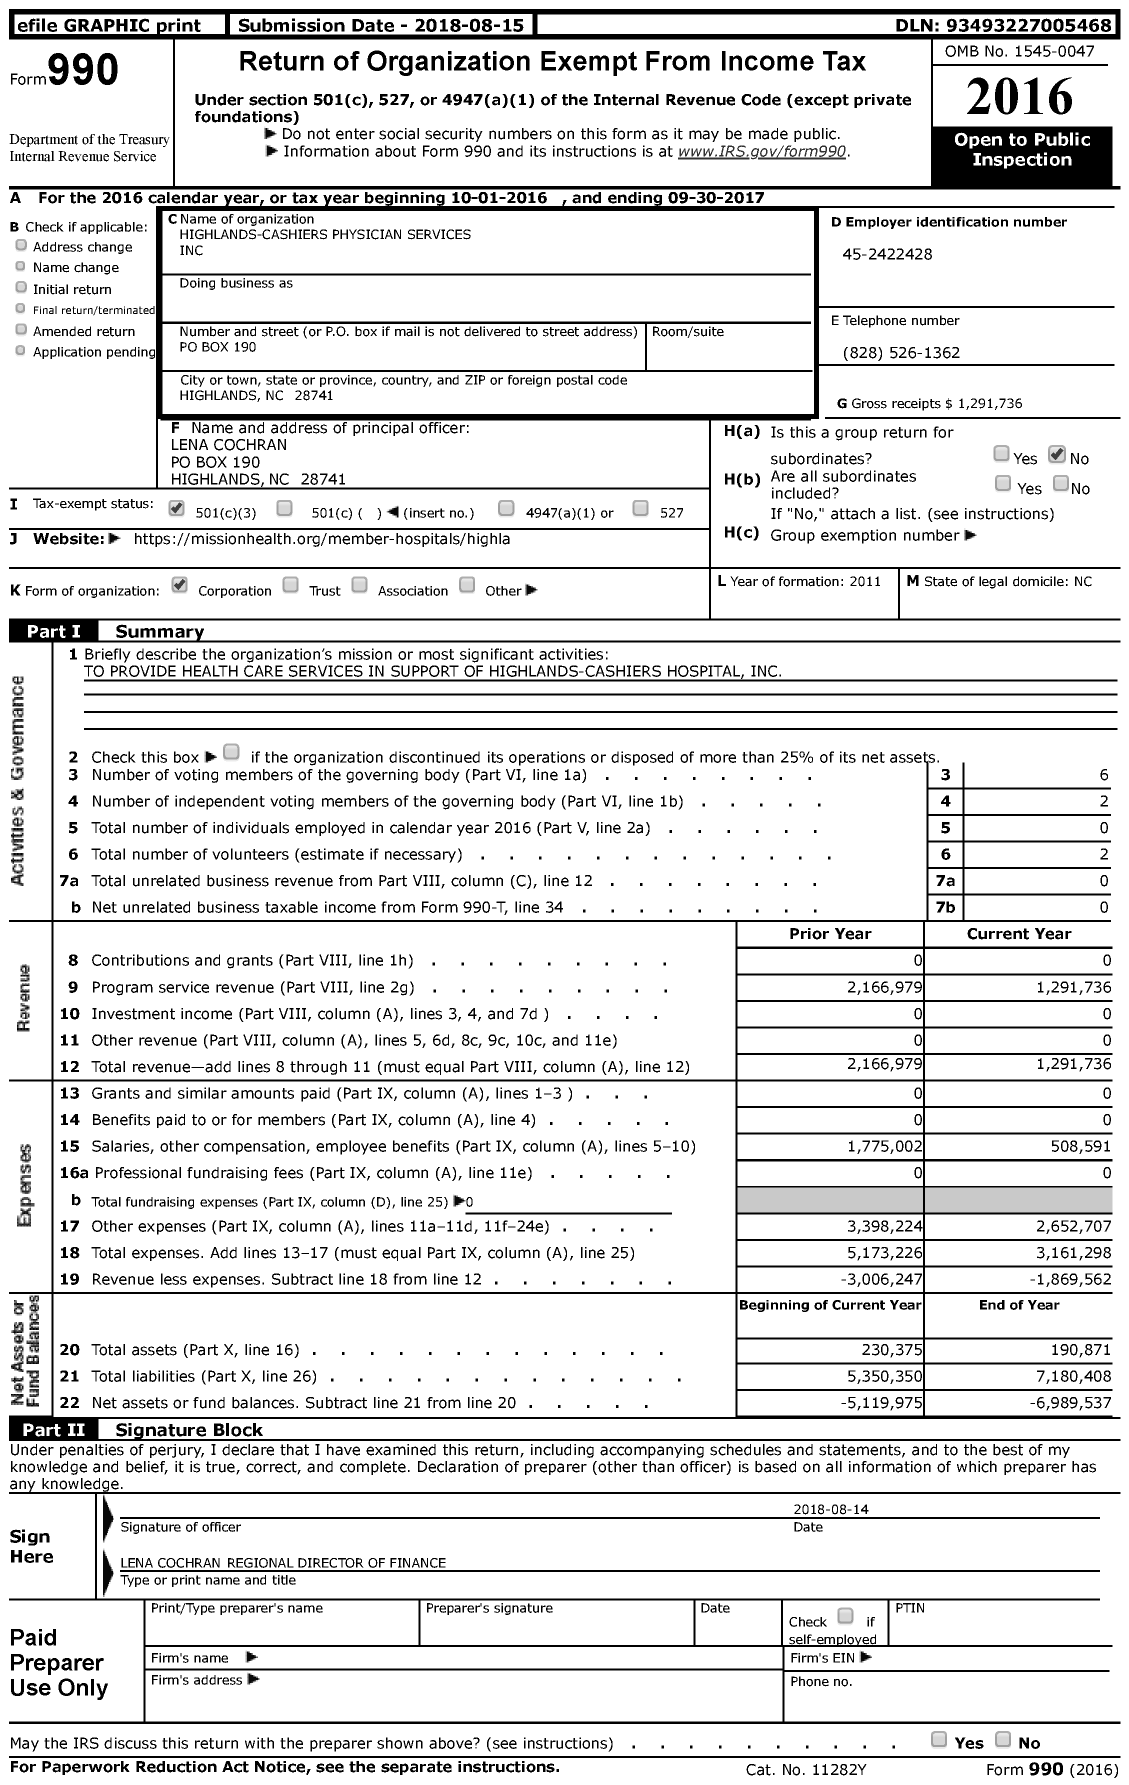 Image of first page of 2016 Form 990 for Highlands-Cashiers Physician Services